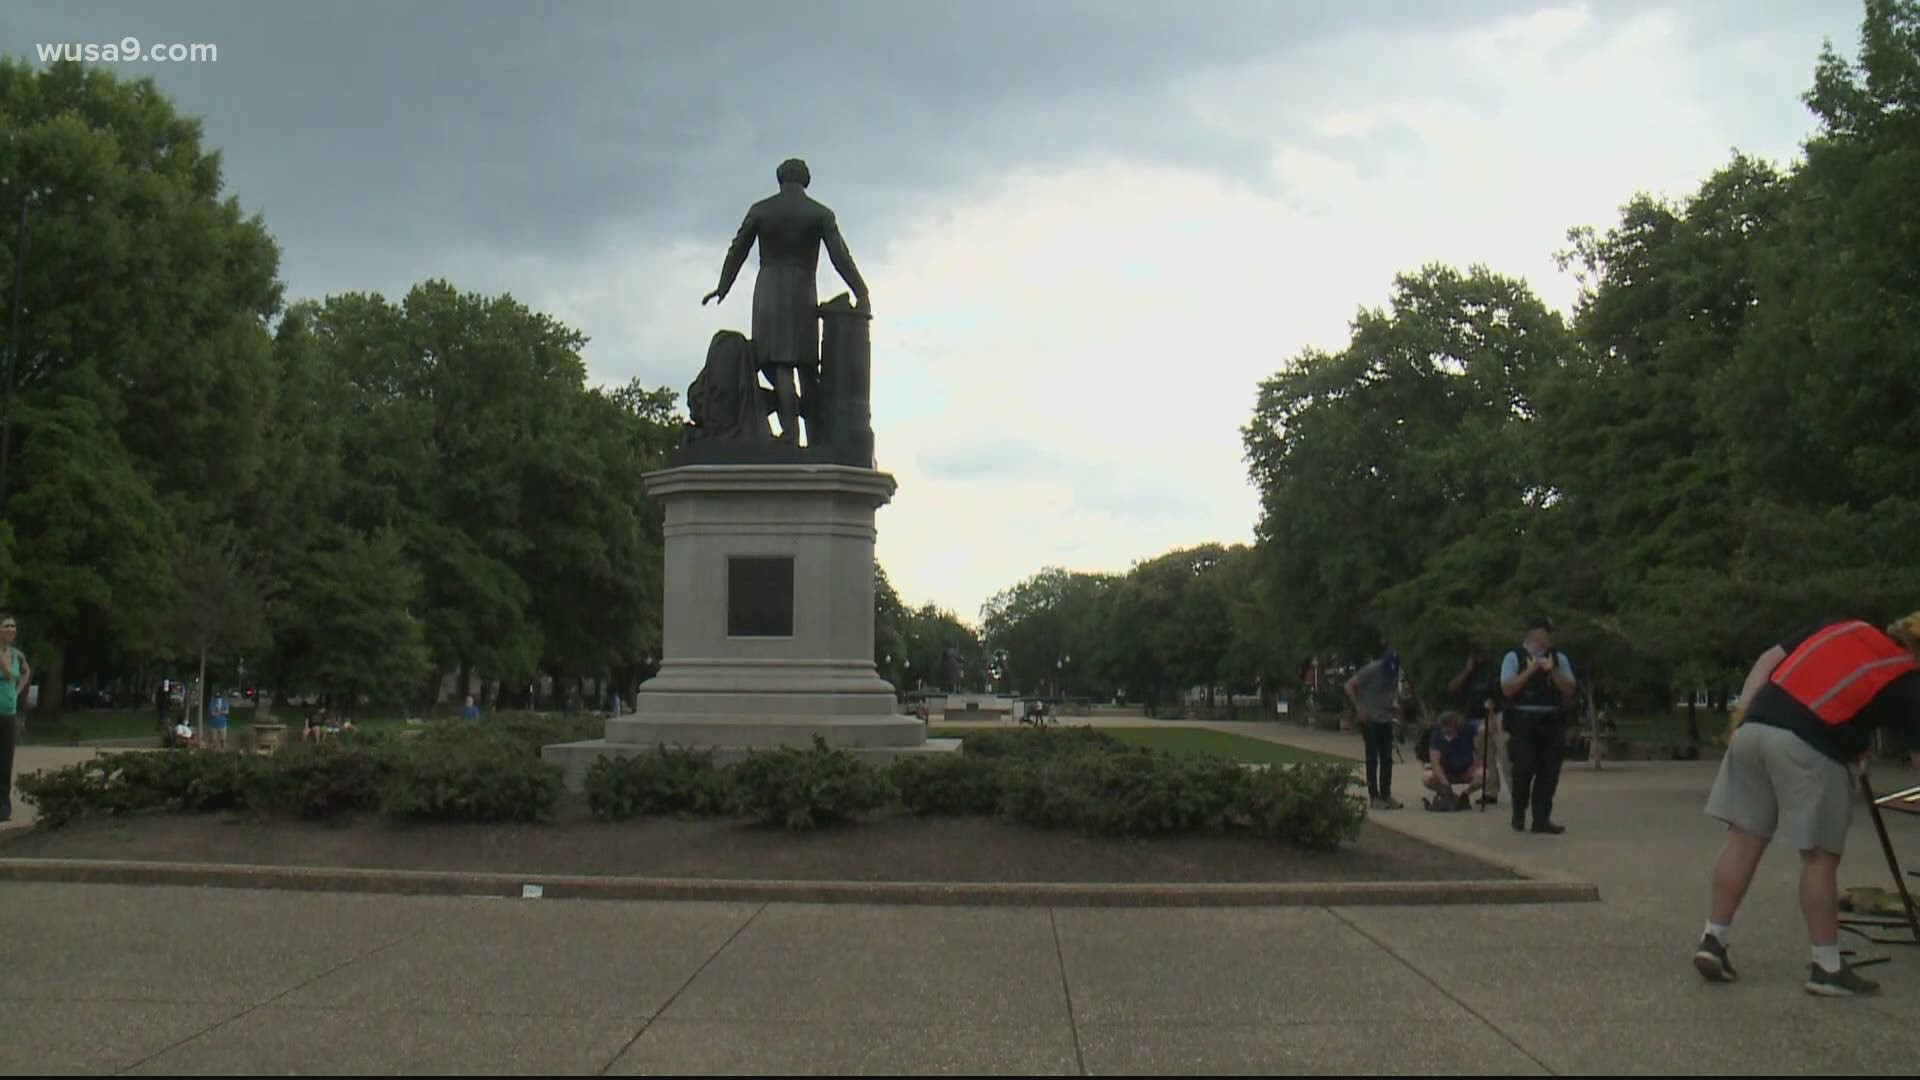 The bronze memorial statue was erected in 1876 to honor Abraham Lincoln for the Emancipation Proclamation. Protesters said they will return Friday to tear it down.